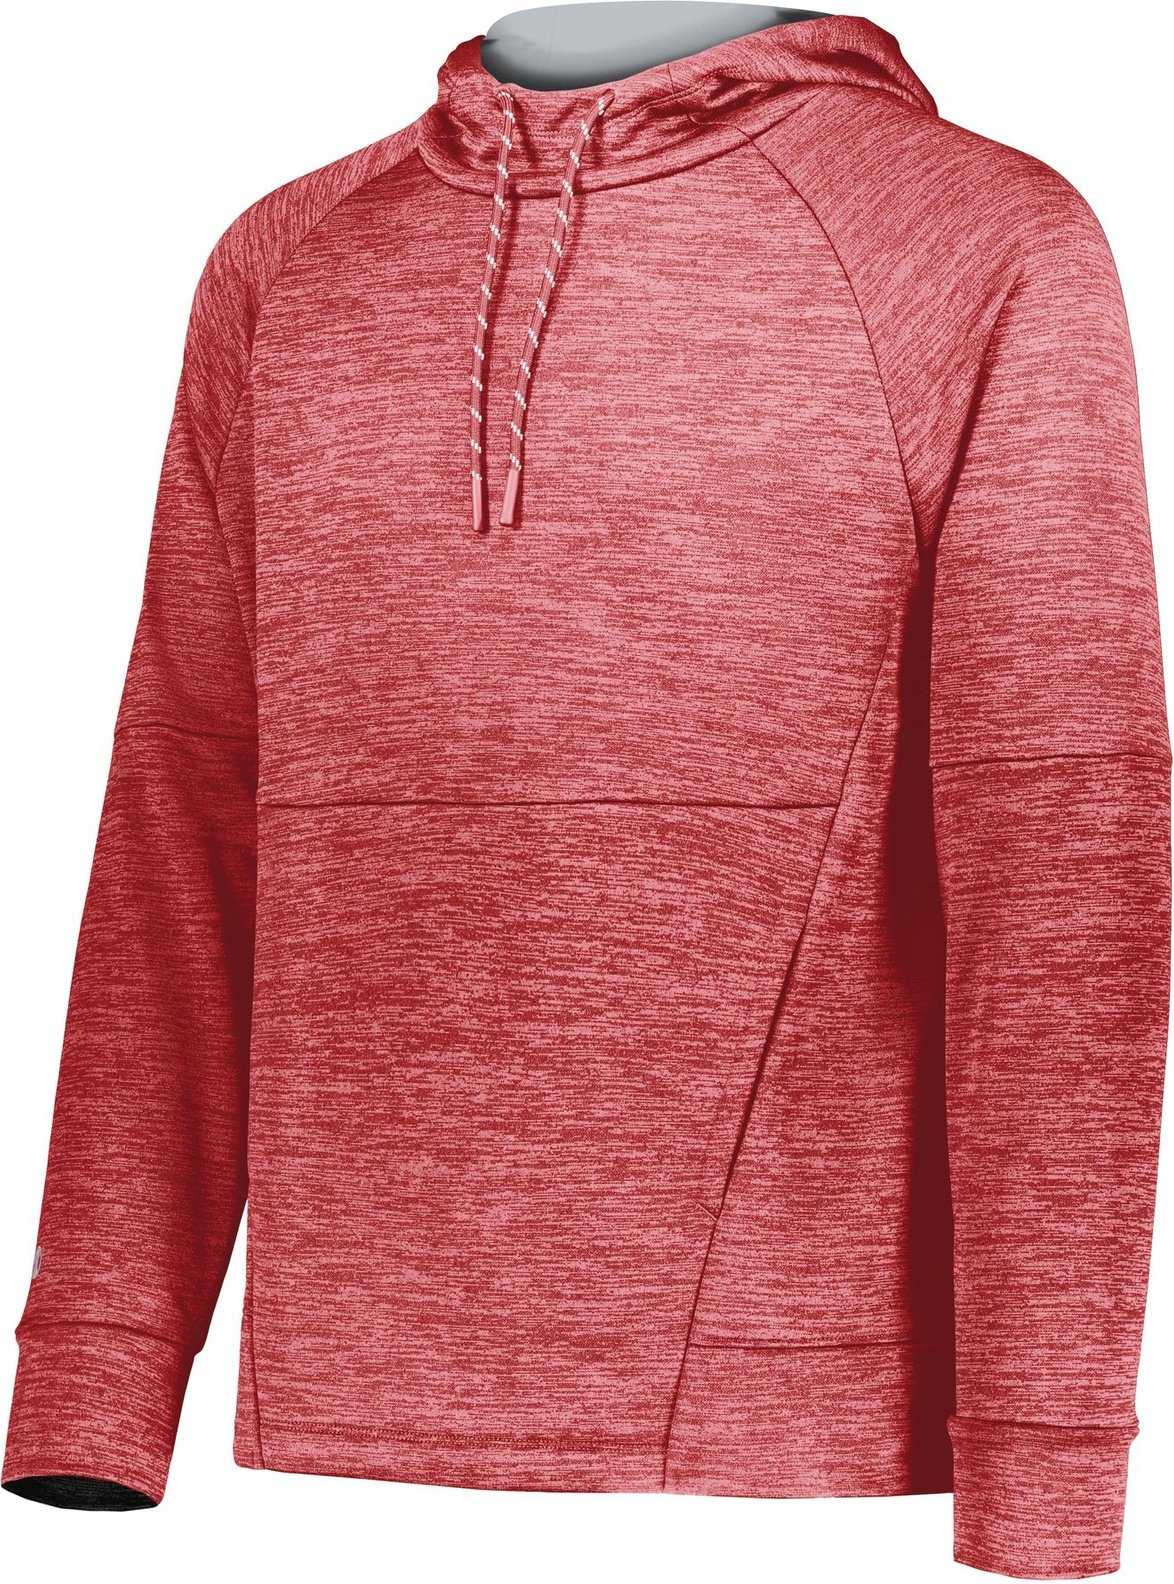 Holloway 223580 All Pro Performance Fleece Hoodie - Scarlet Heather Silver - HIT a Double